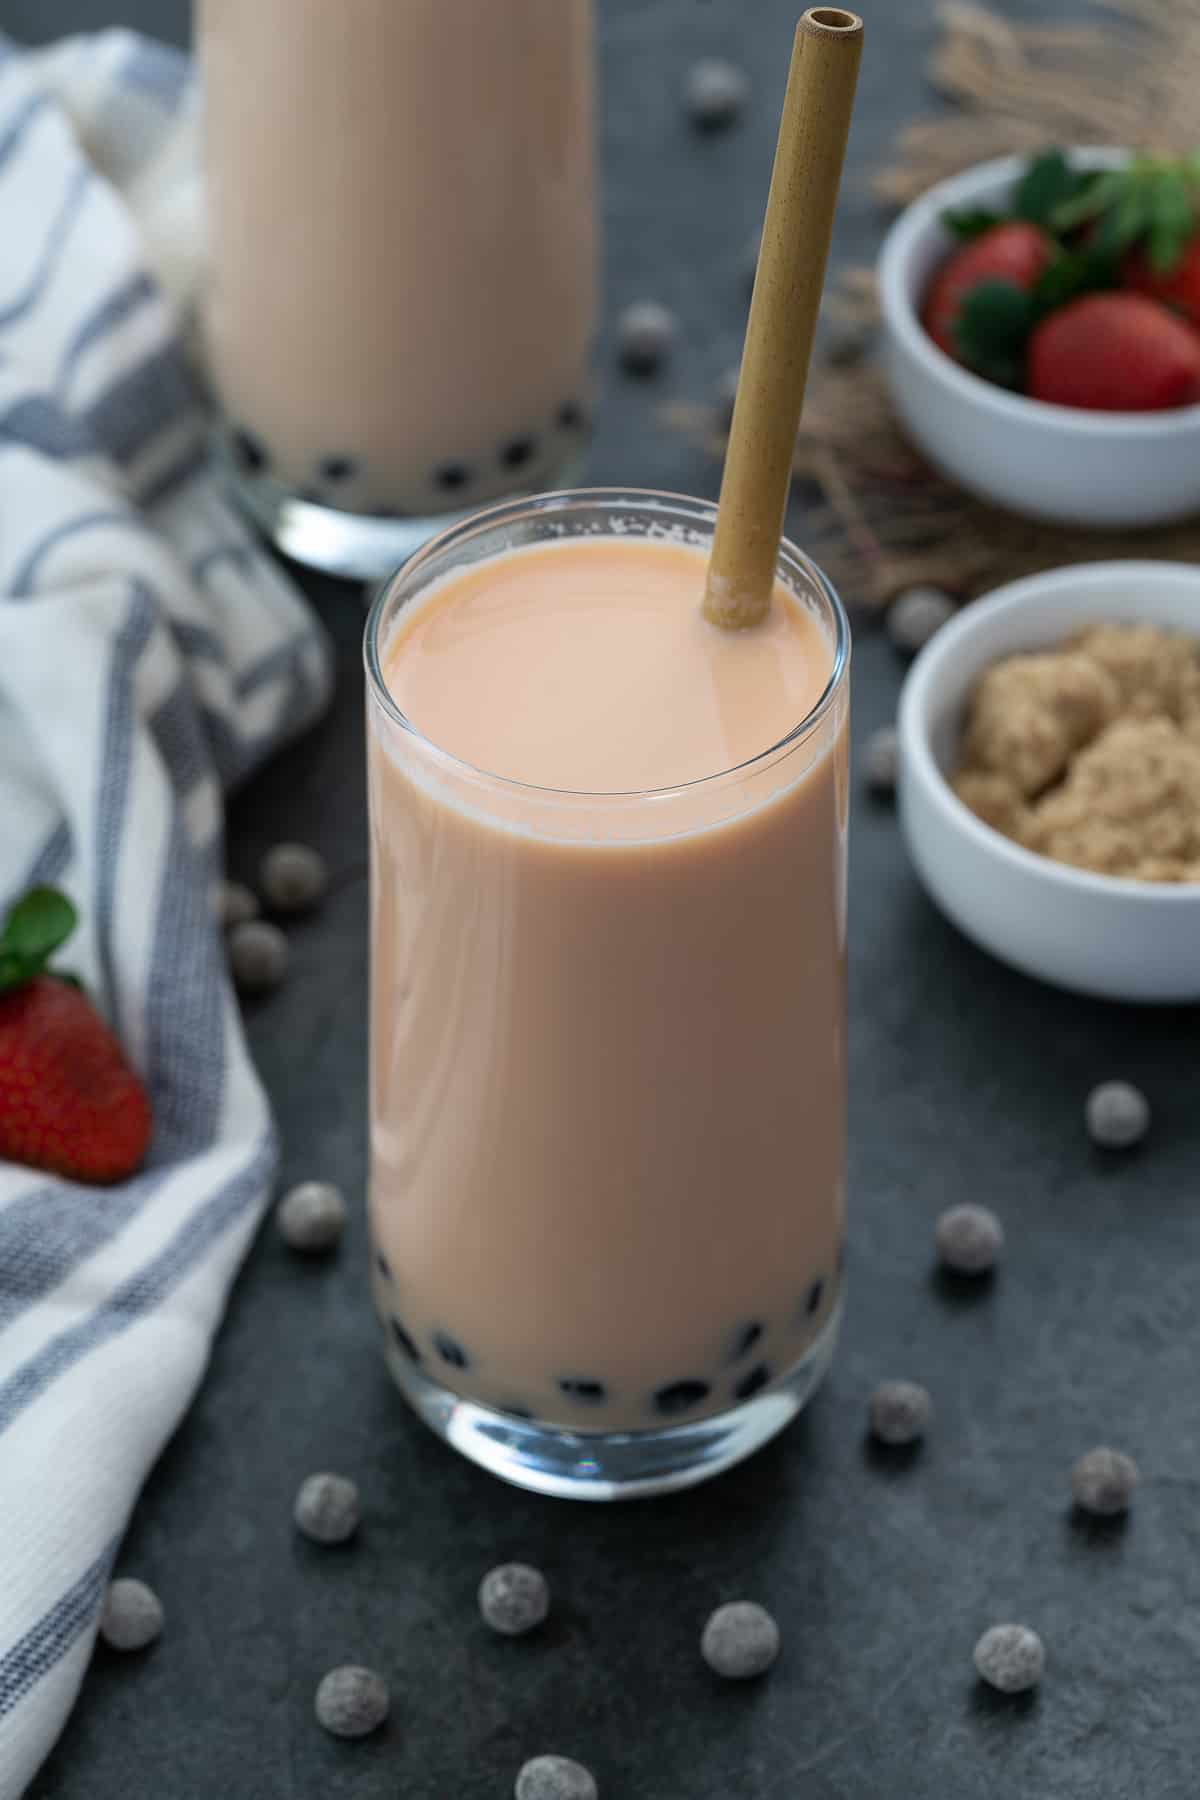 Strawberry Milk Bubble Tea served in a glass with boba pearls scattered nearby.